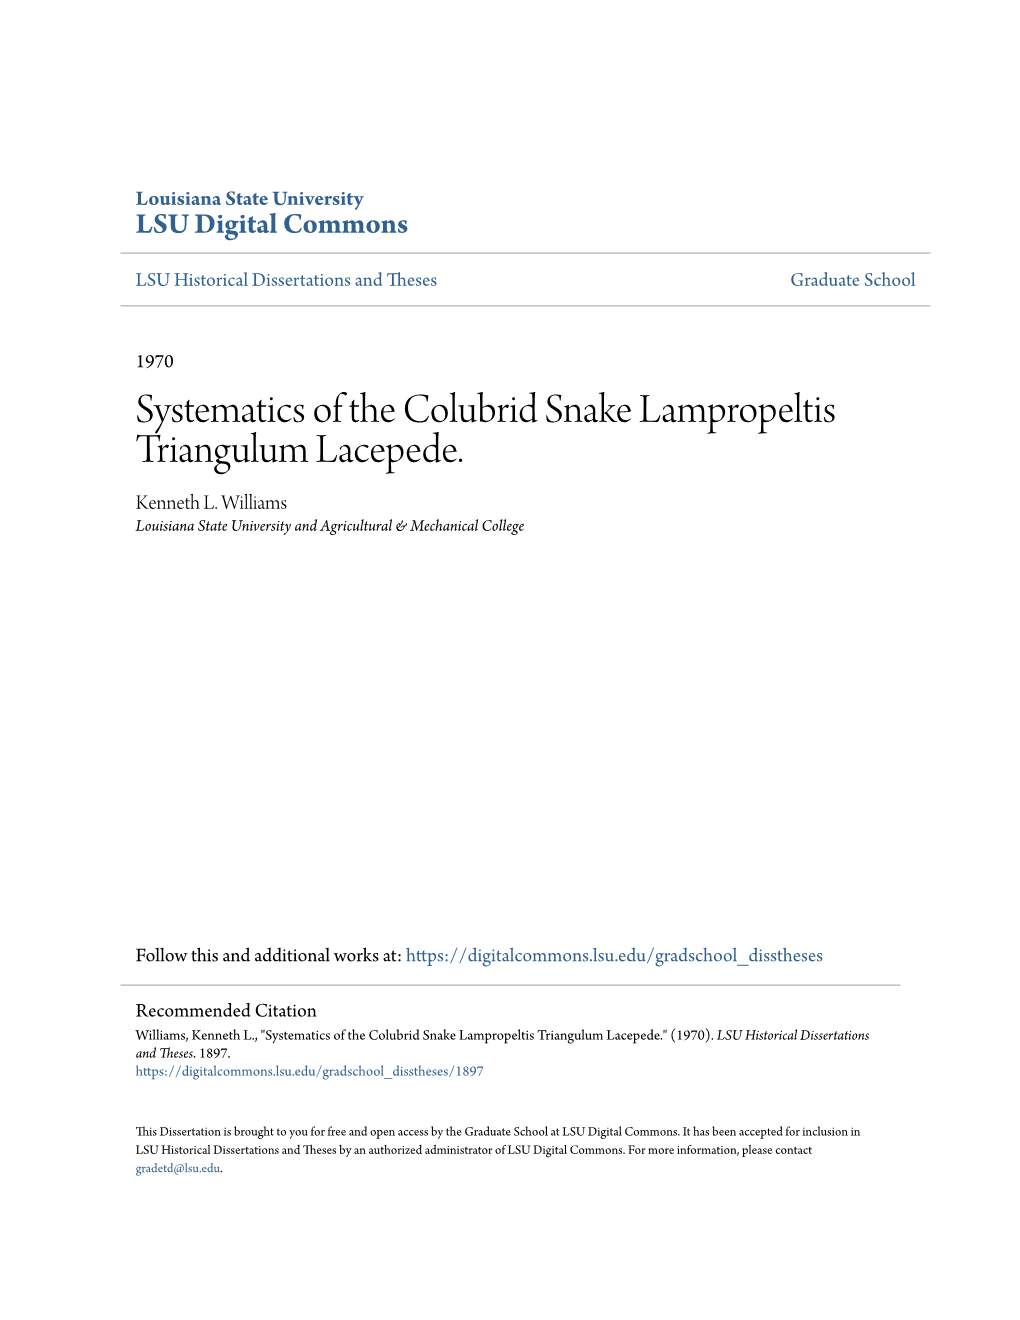 Systematics of the Colubrid Snake Lampropeltis Triangulum Lacepede. Kenneth L